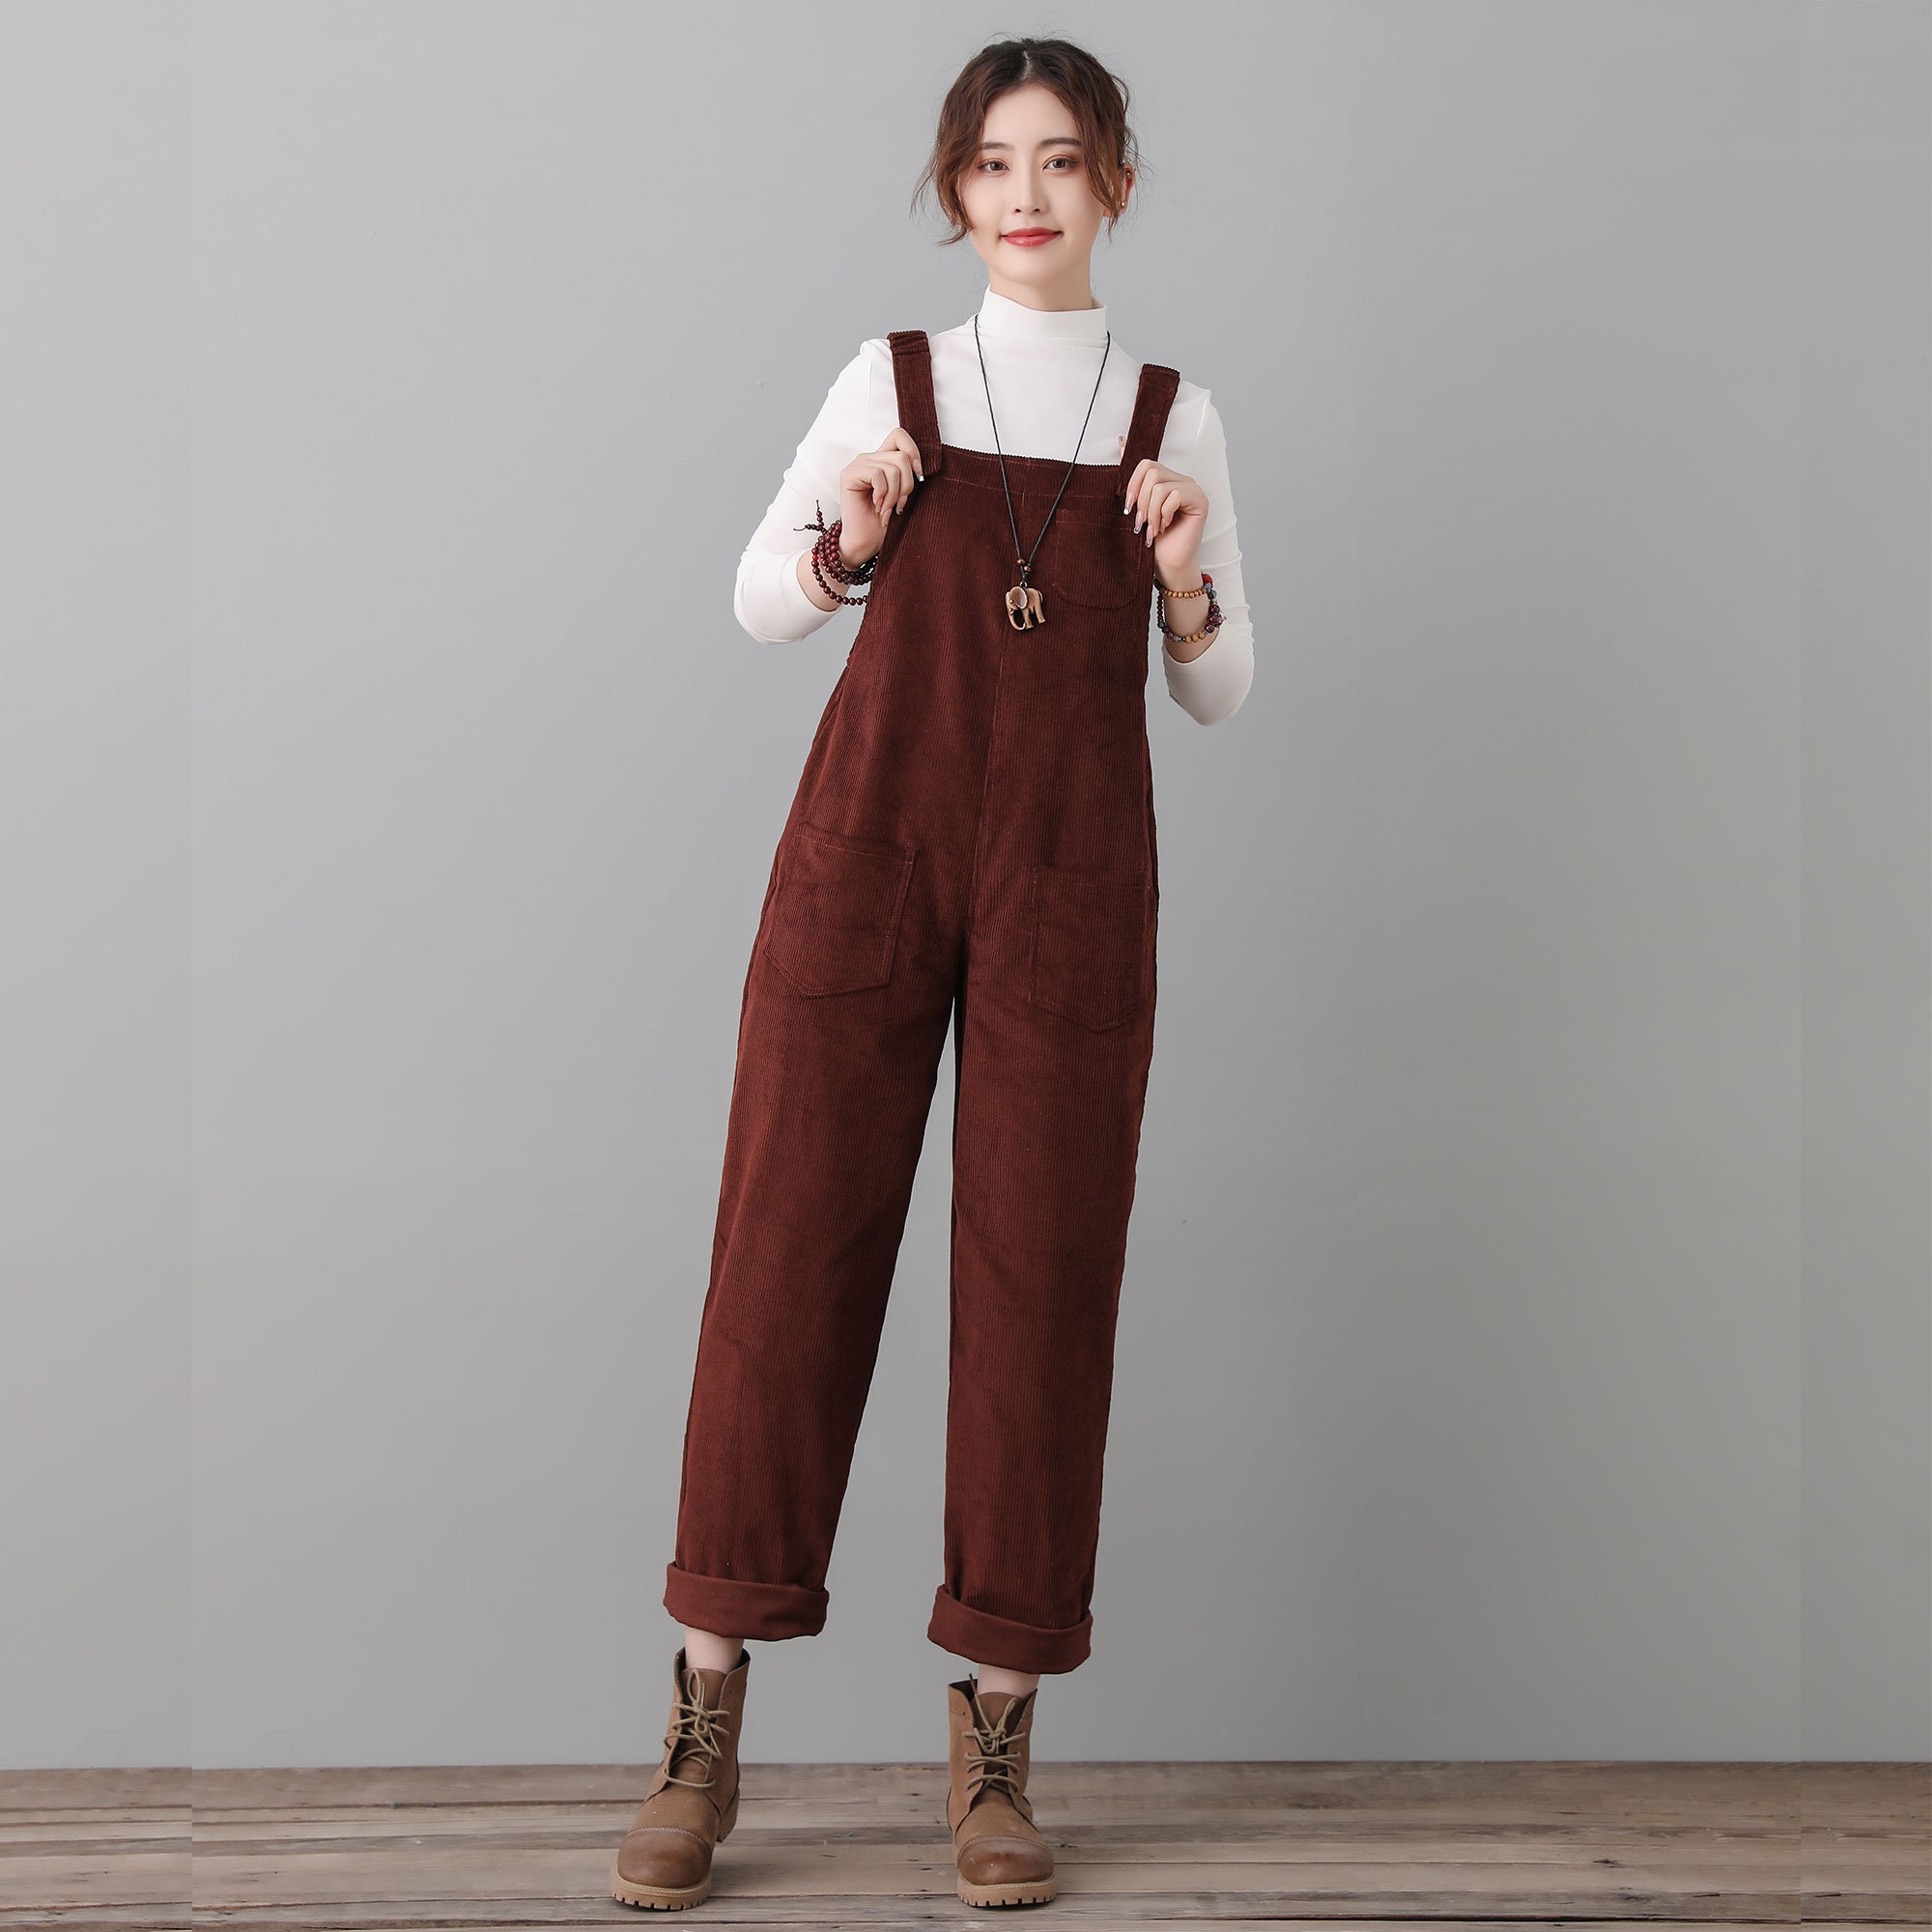 Onedreamer Womens Corduroy Overalls Adjustable Straps Baggy Bib Corduroy Jumpsuit Casual Corduroy with Pockets 